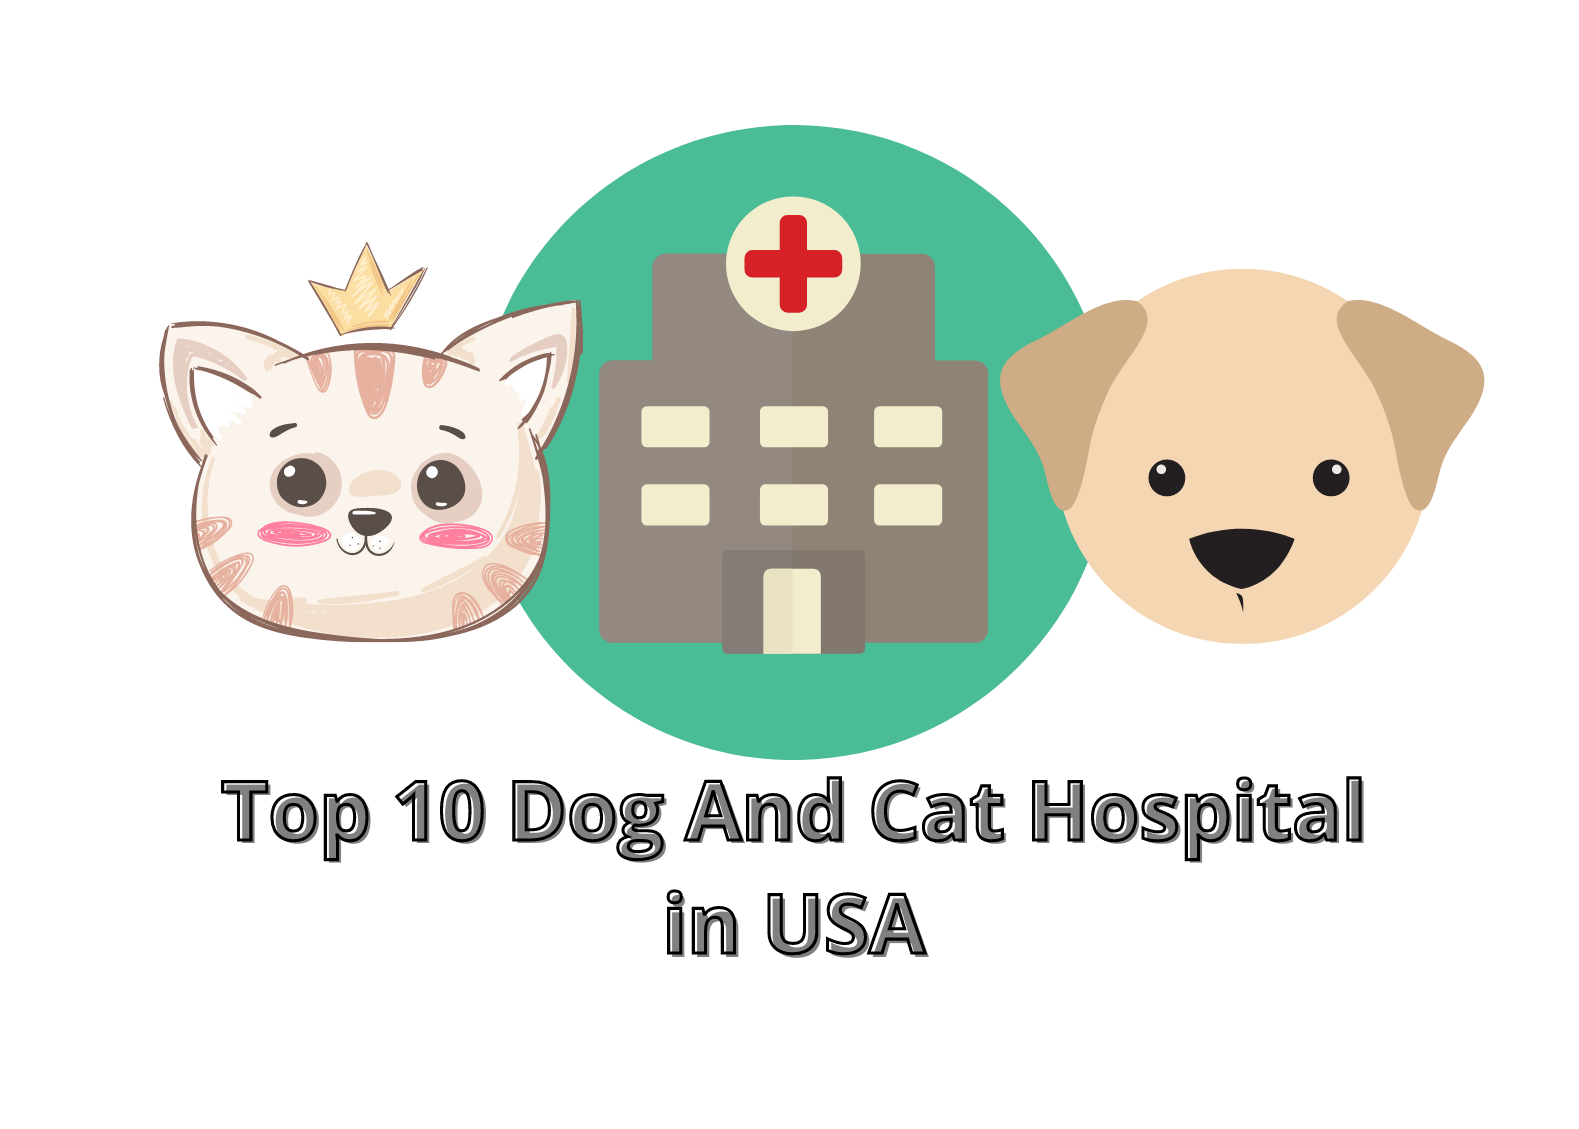 Top 10 Dog And Cat Hospital in the United States (USA)